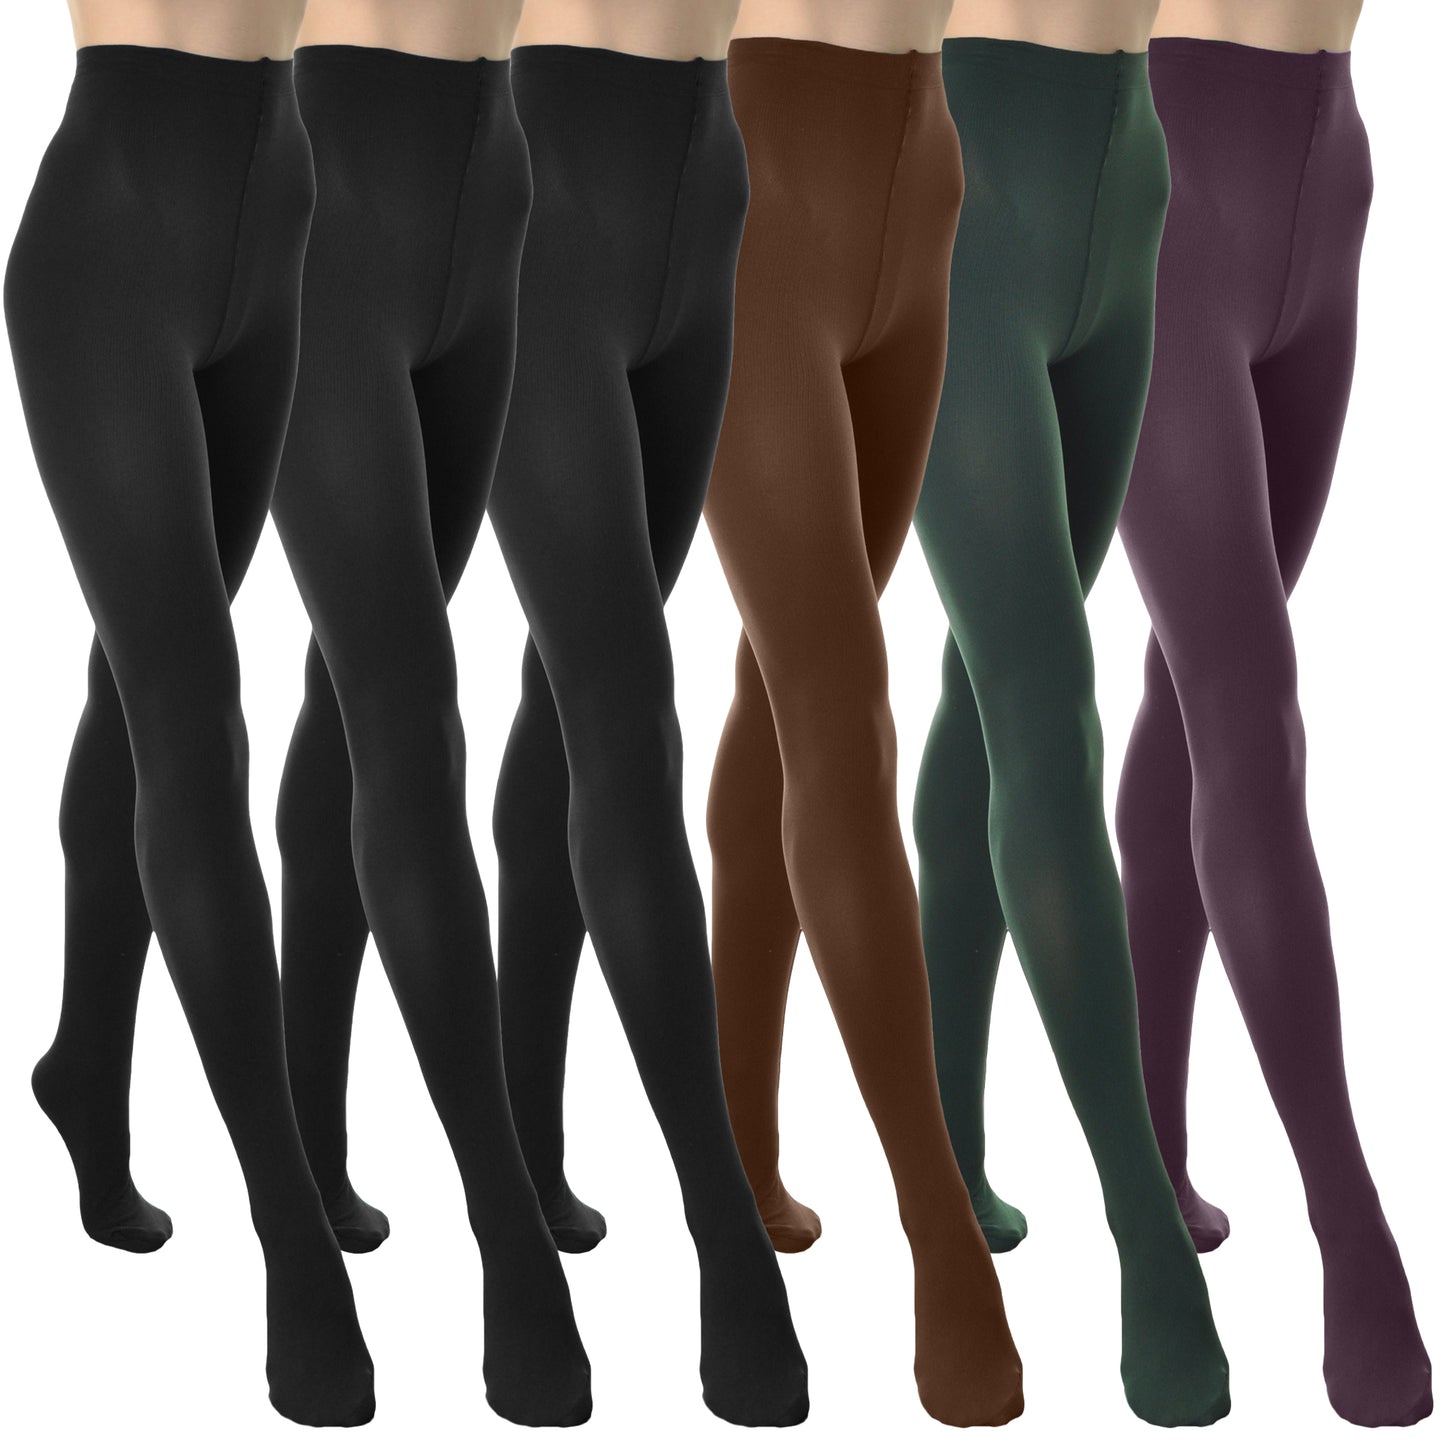 Winter Warmth Brushed Interior Thermal Tights (1-6 Pack)